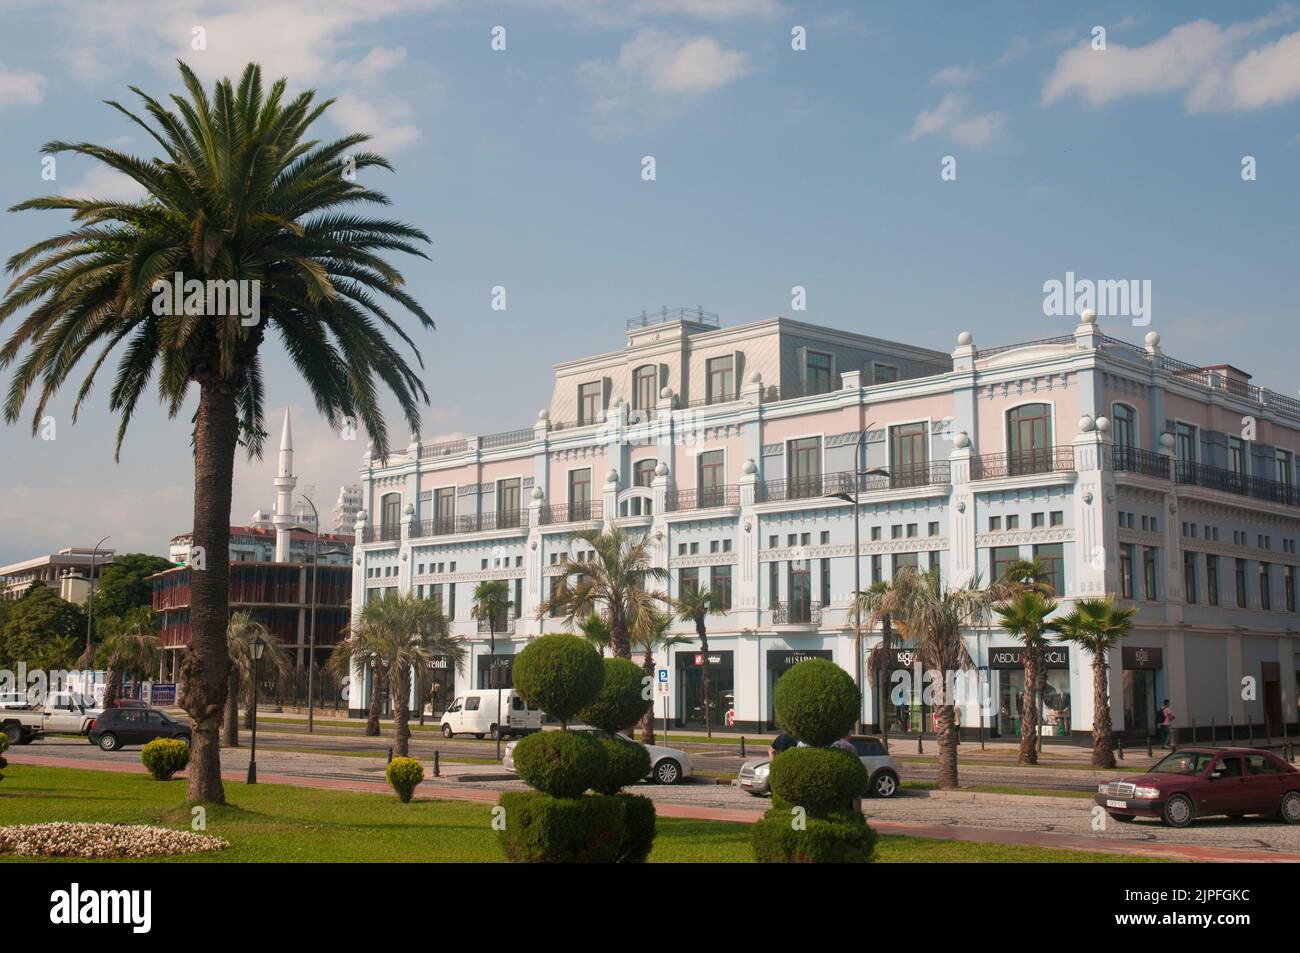 Grand public buildings from the heyday of Batumi, a port city on the Black Sea in modern-day Georgia Stock Photo